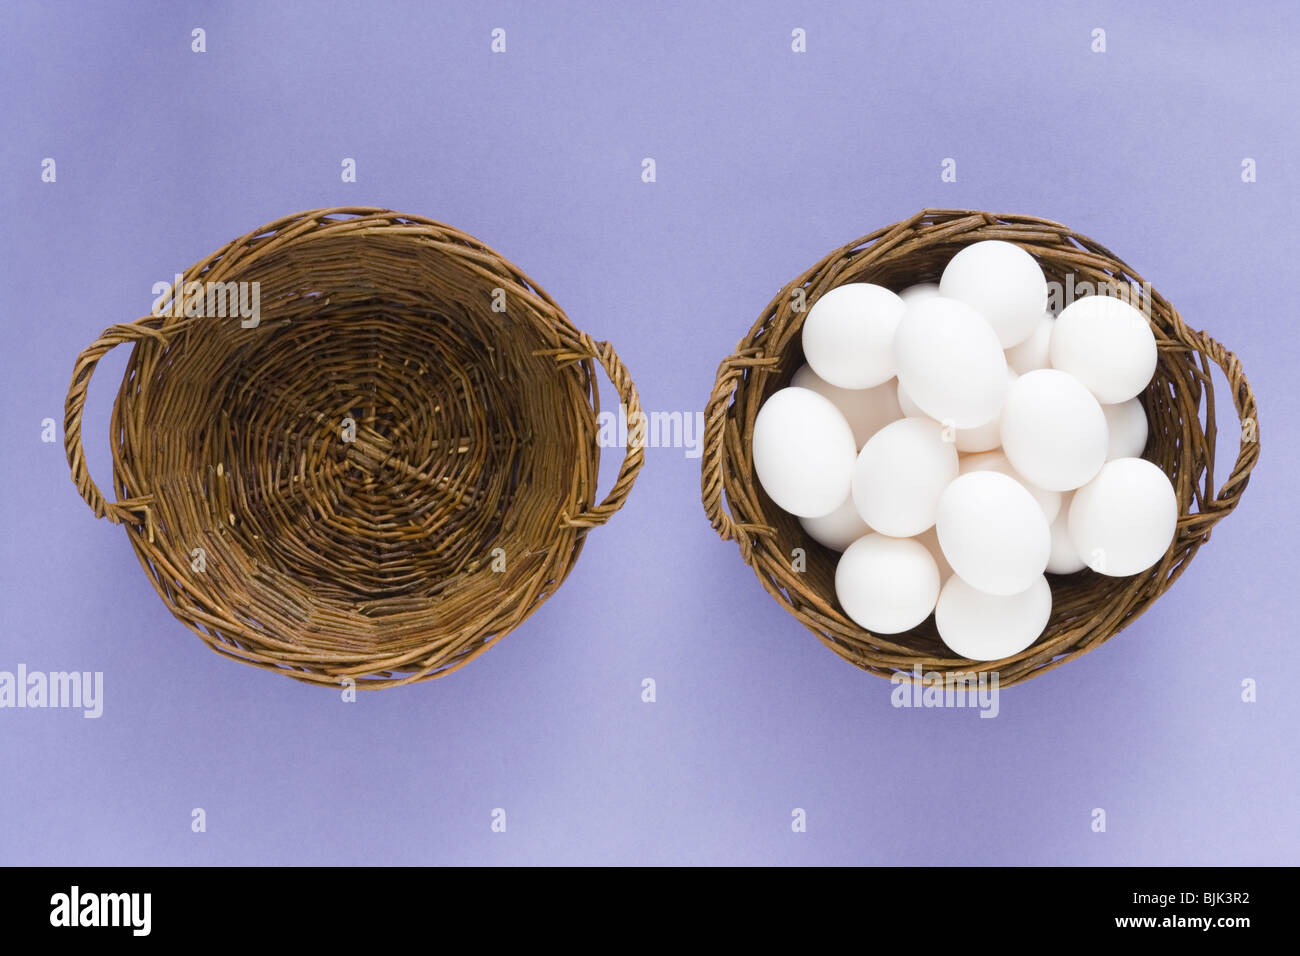 Empty basket and basket filled with eggs Stock Photo